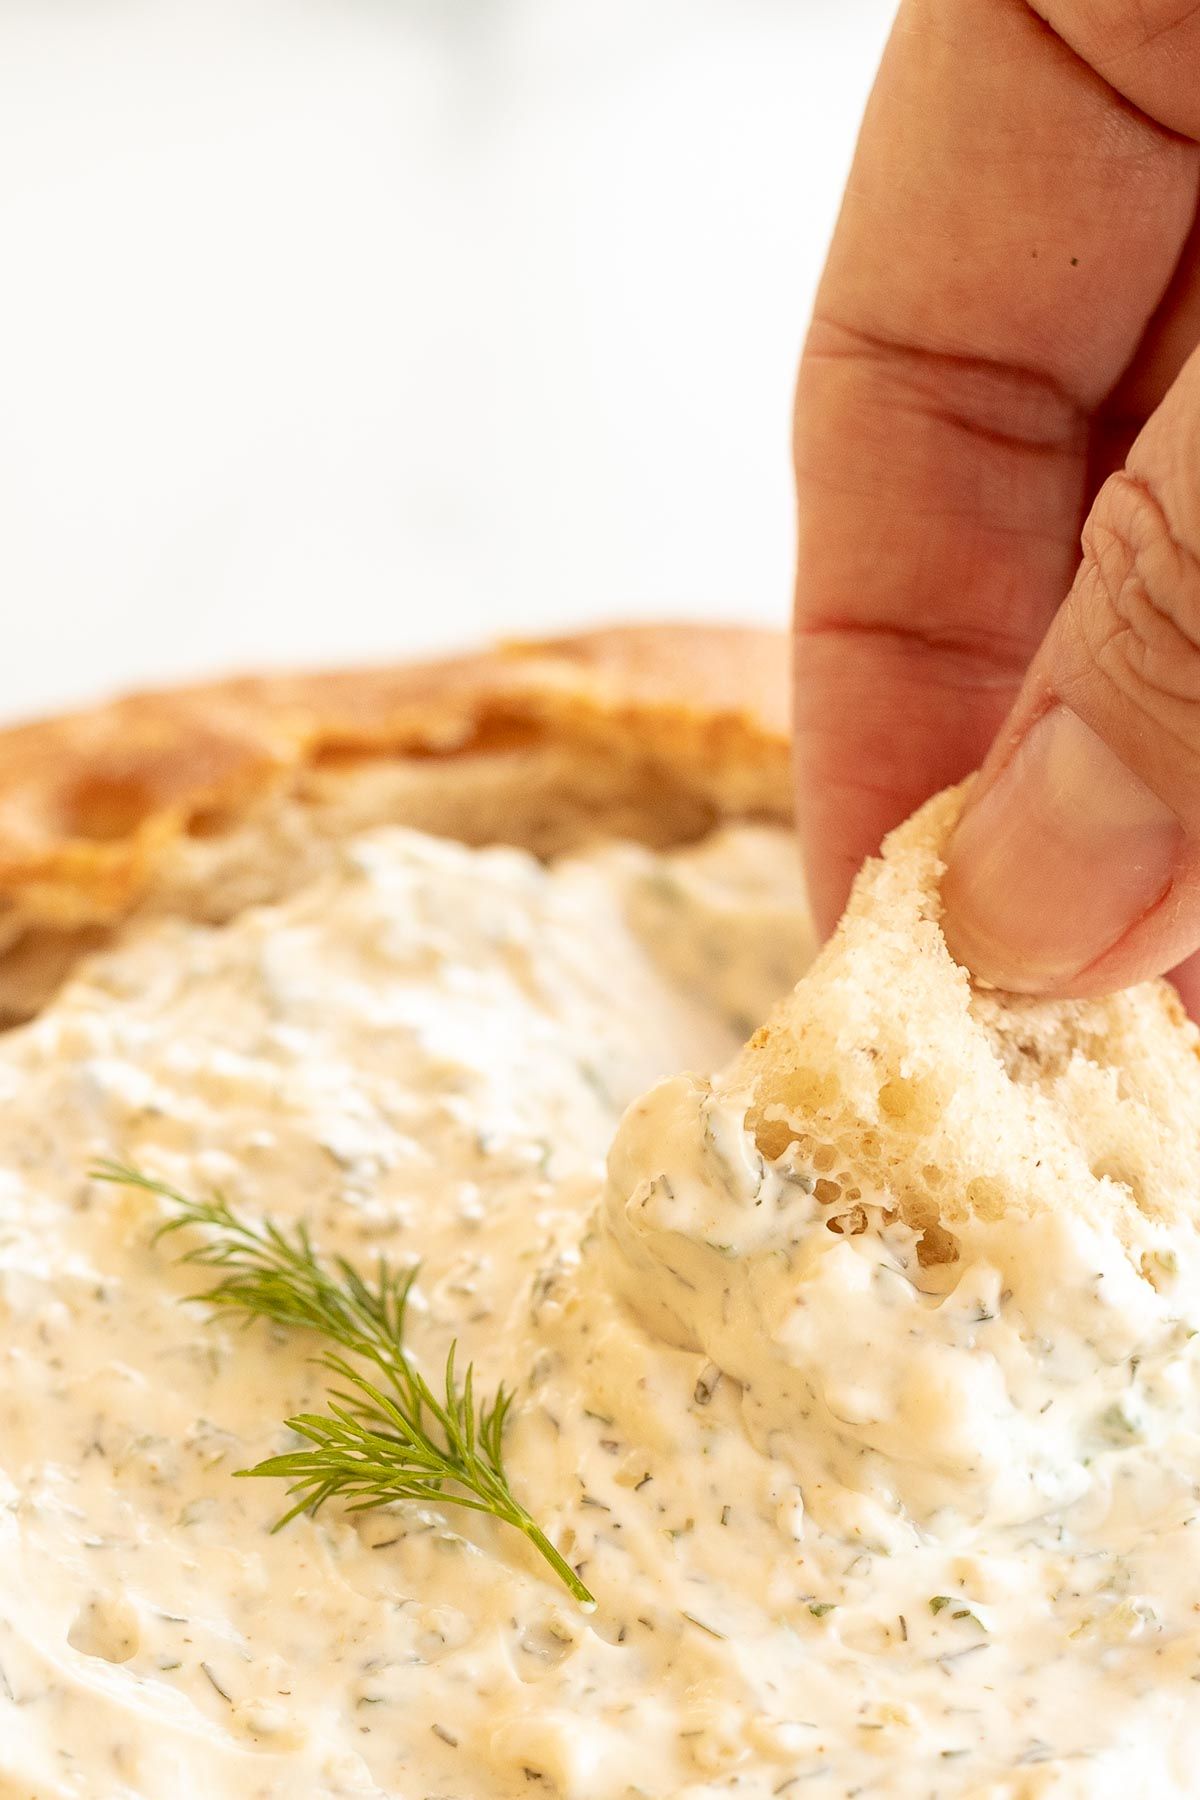 A hand dipping a chunk of bread into a bowl of a dill dip recipe.